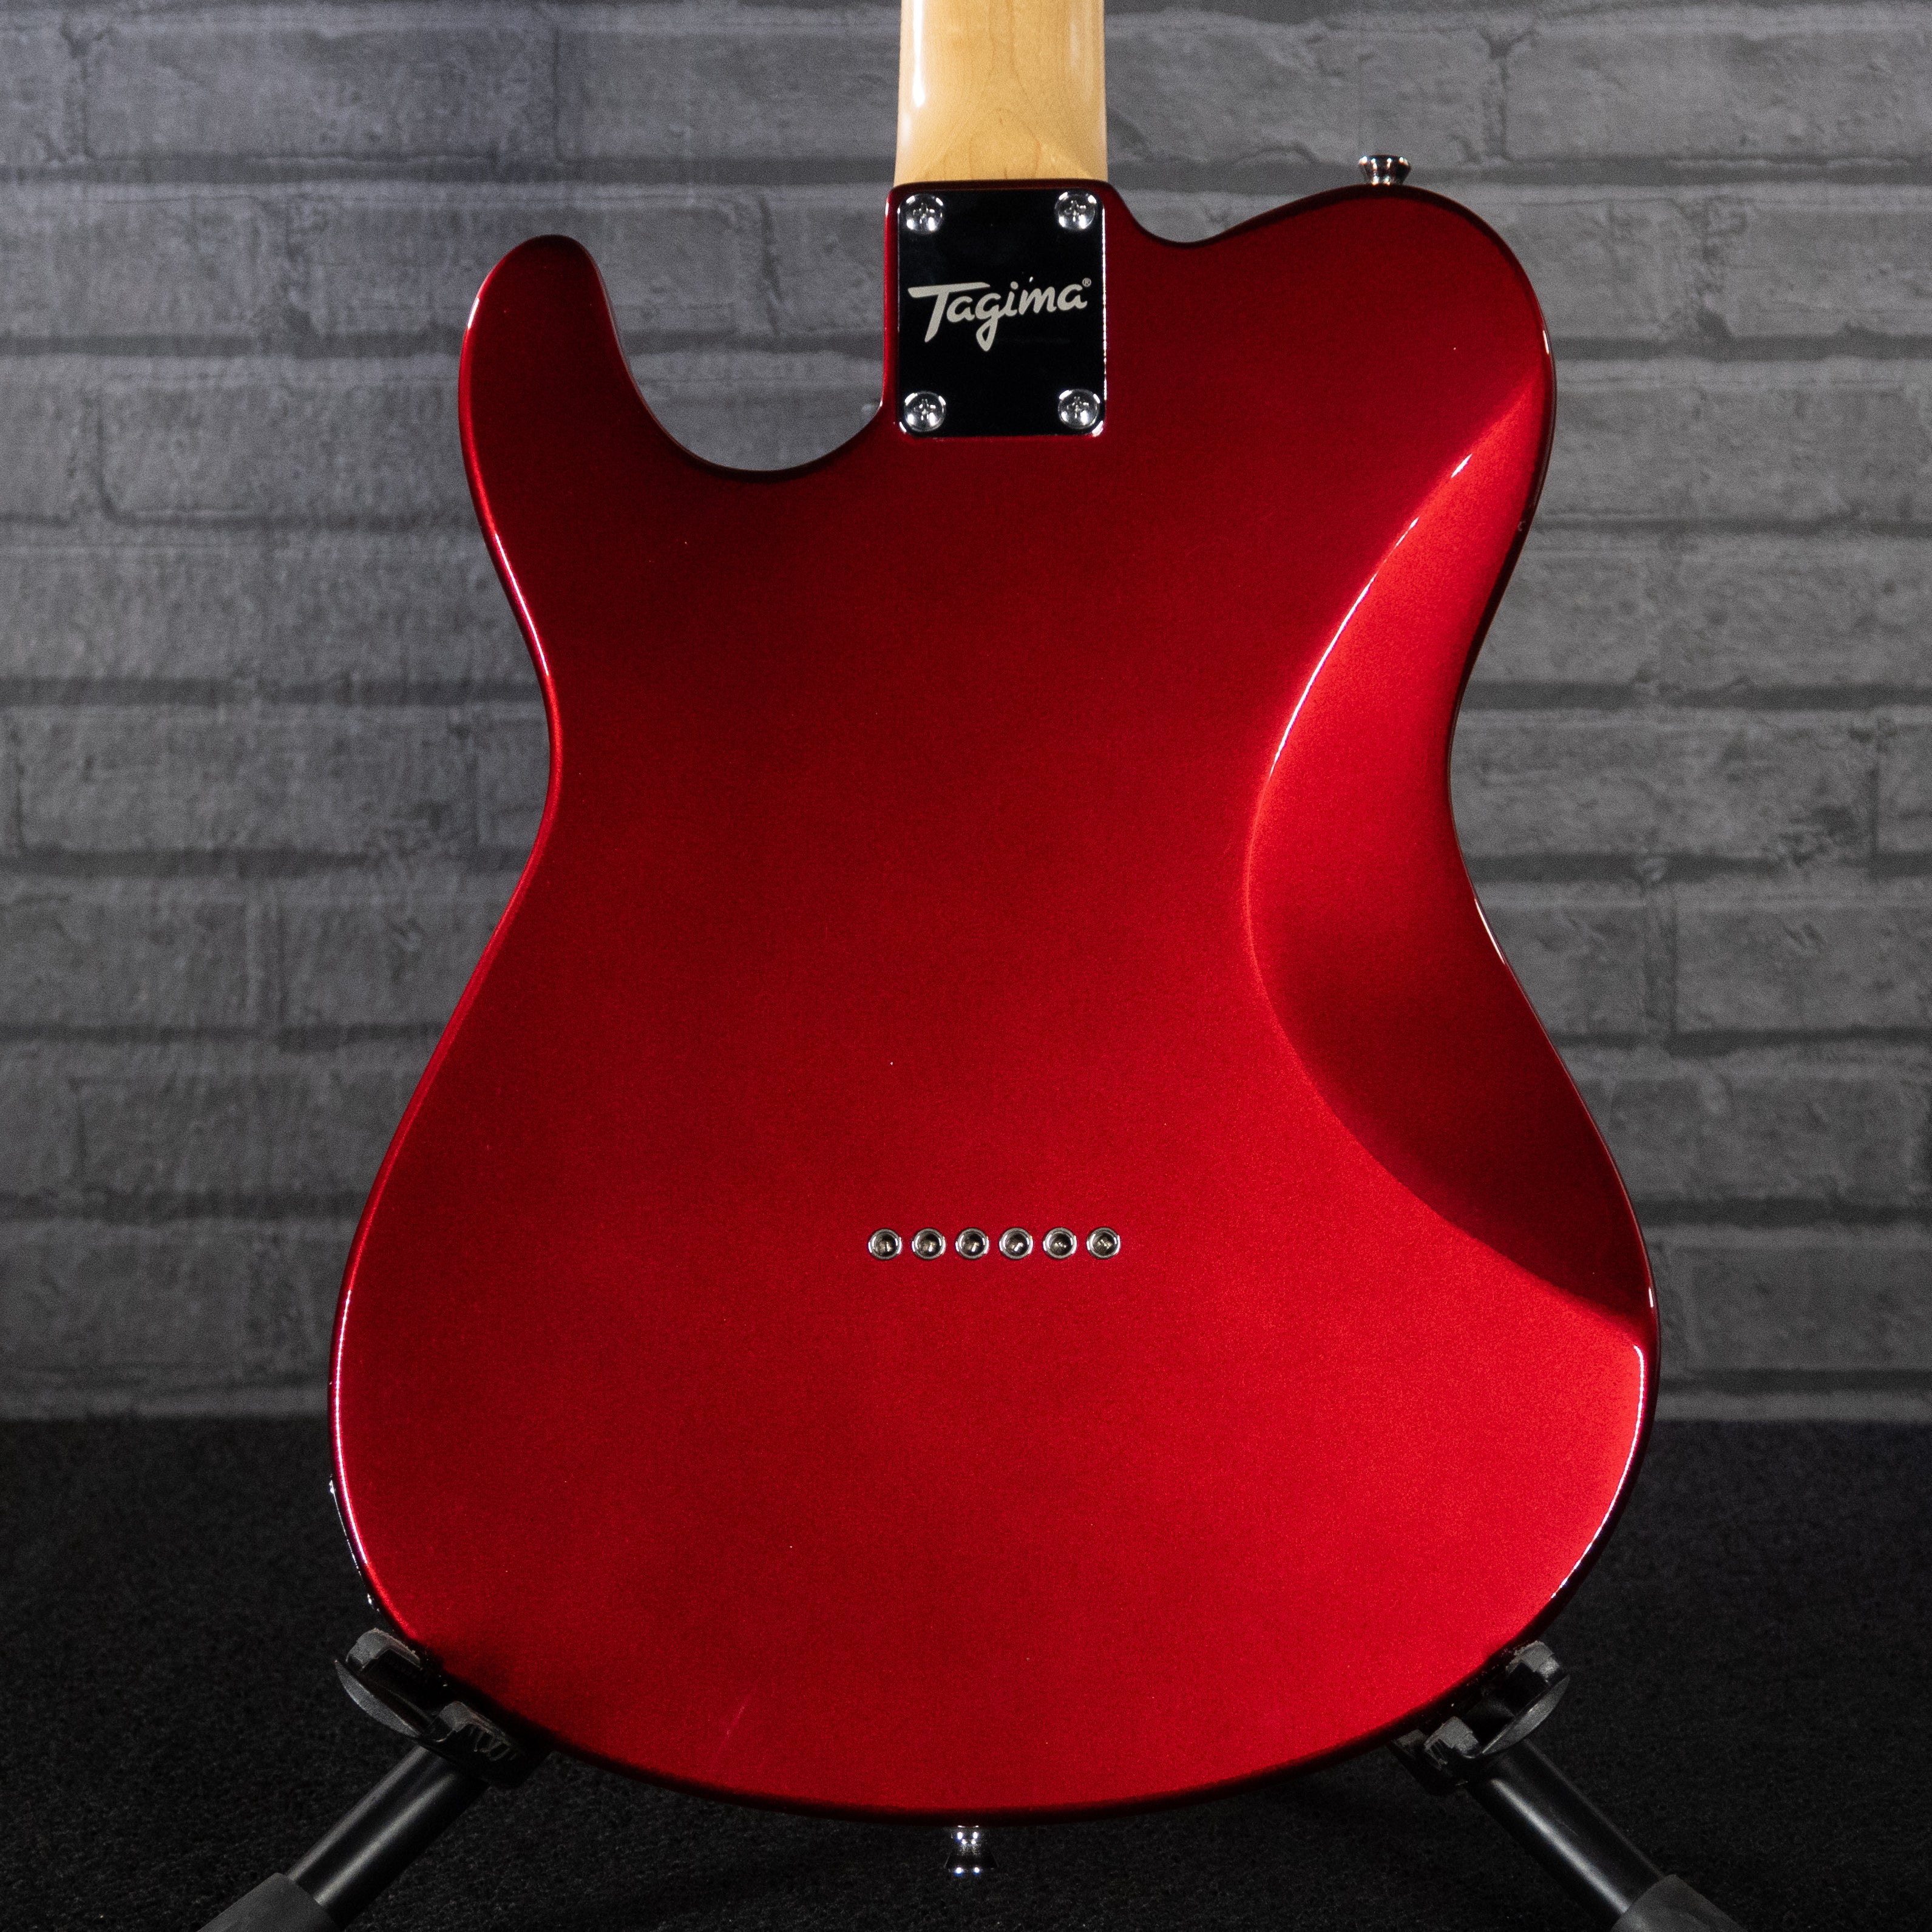 Tagima T 550 Electric Guitar (Candy Apple Red)